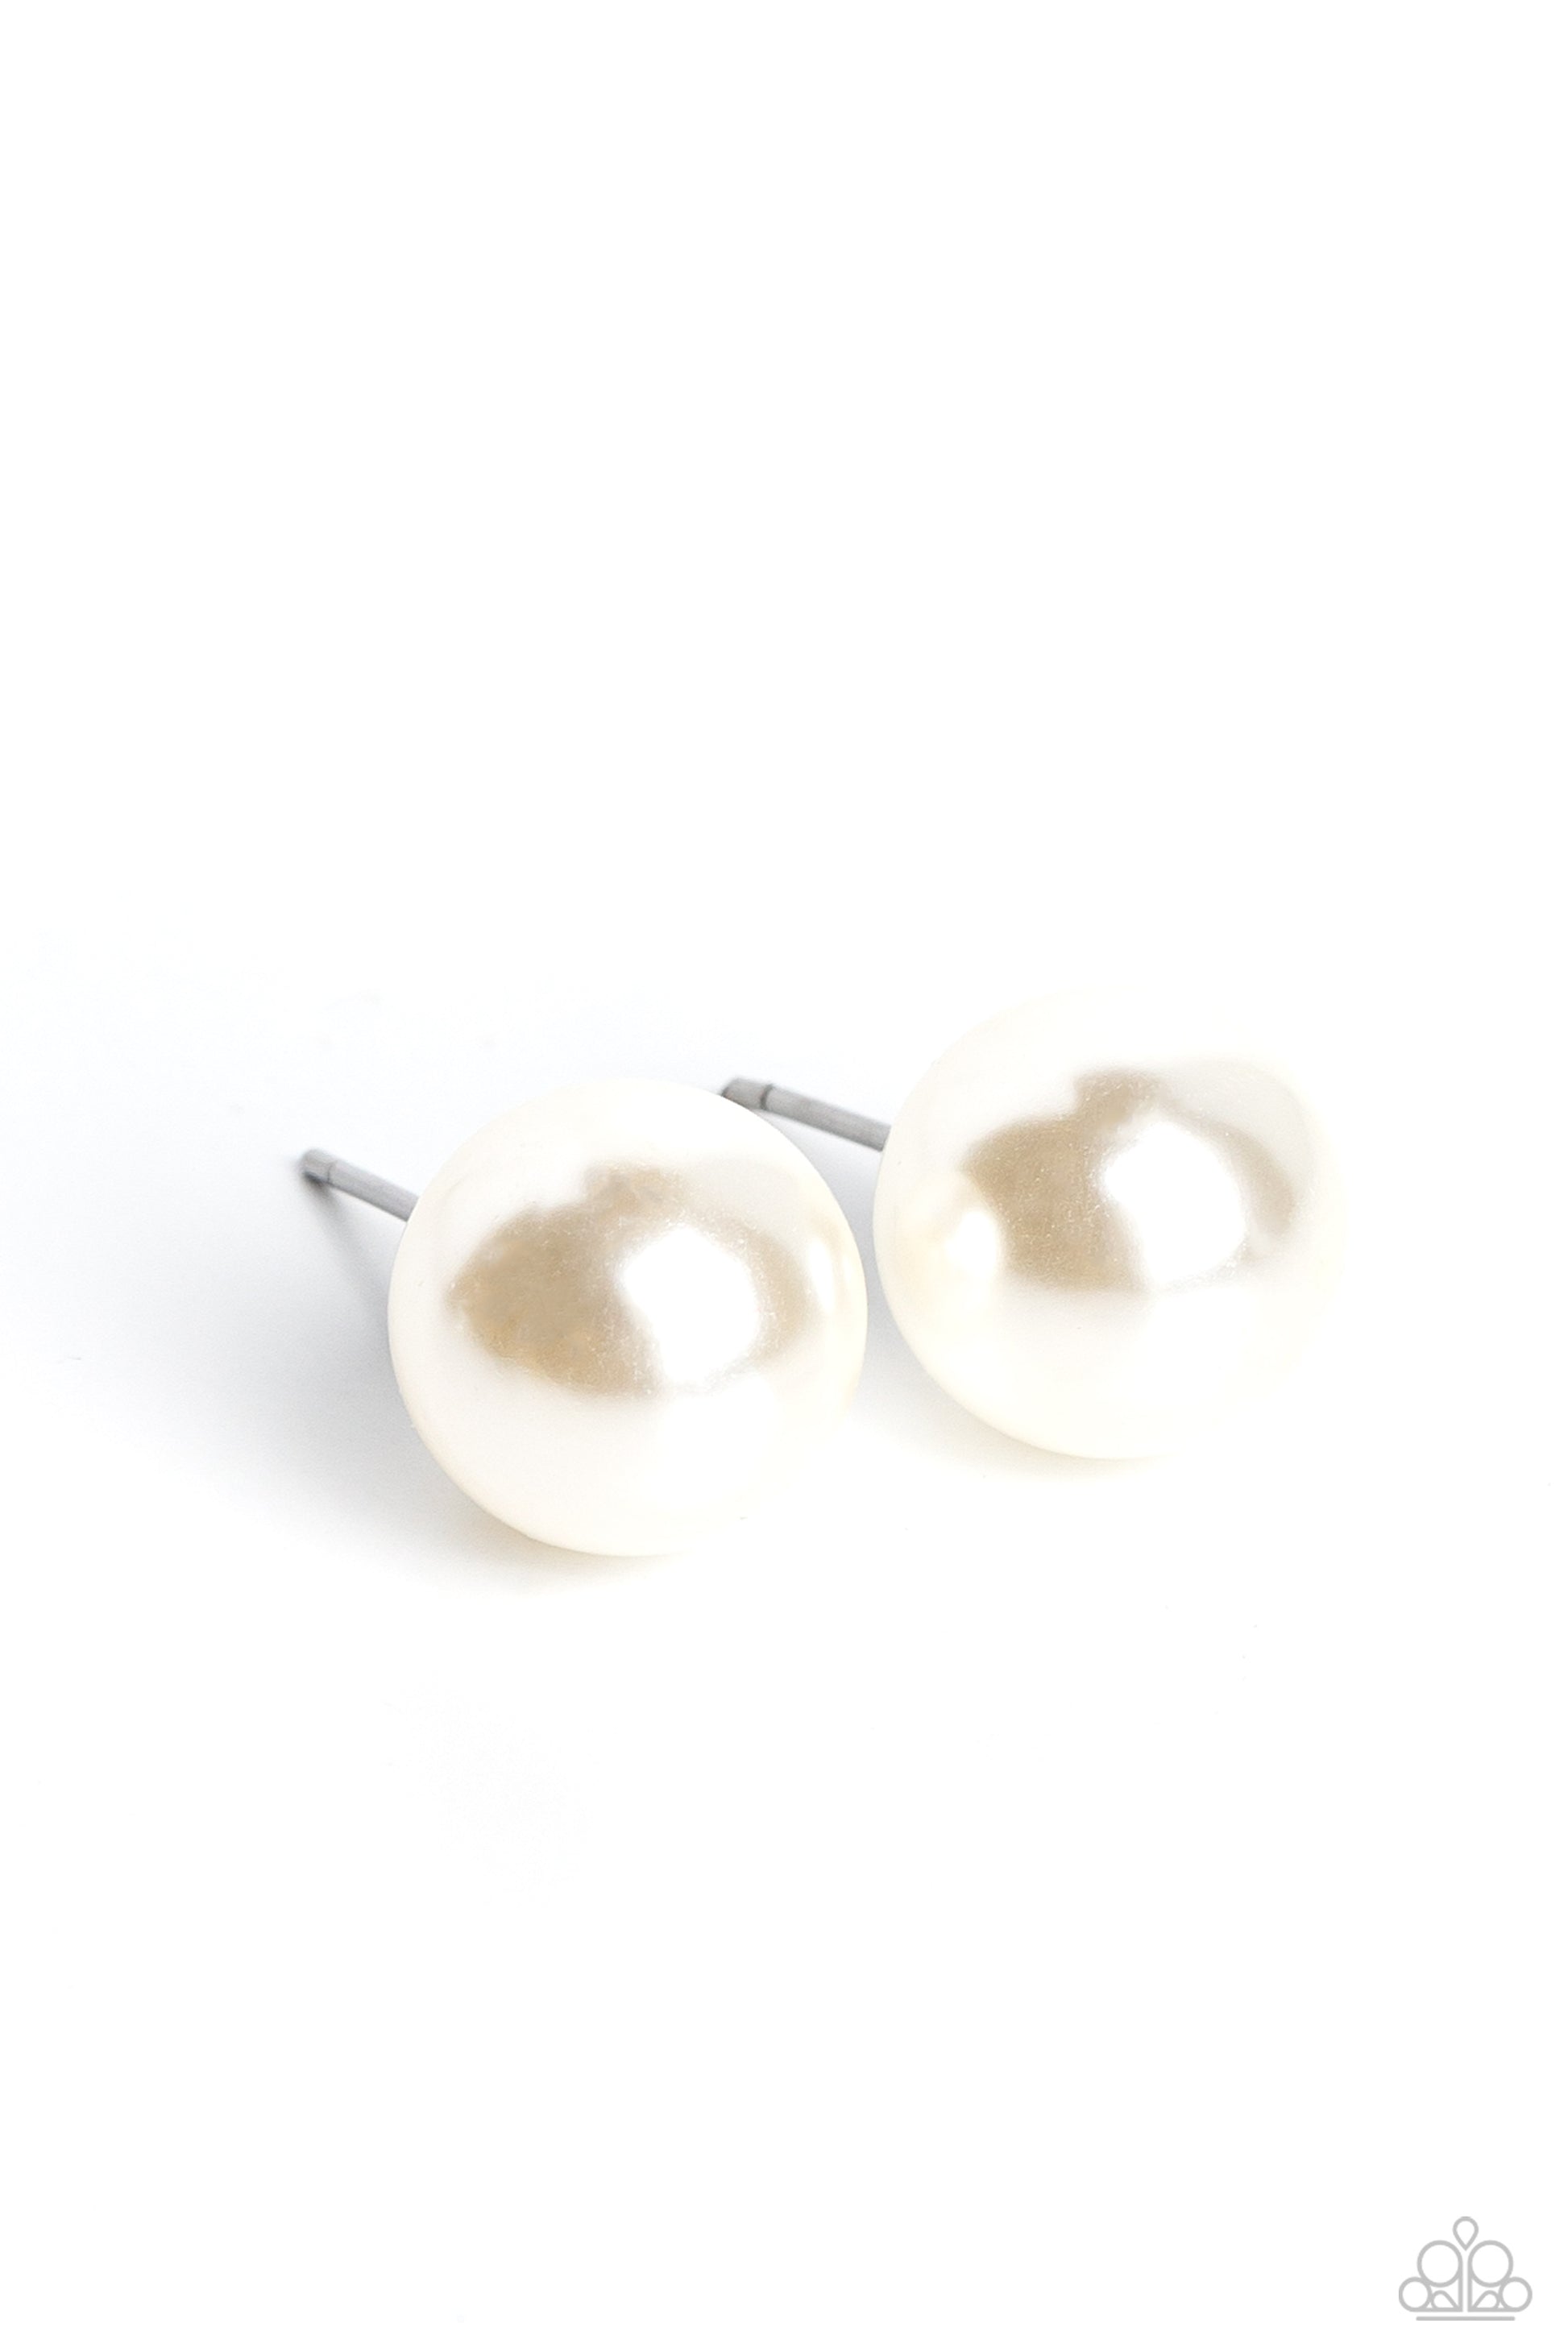 Paparazzi Accessories Debutante Details - White An oversized white pearl, stands out against the ear adding a timeless twist to a basic staple piece perfect for layering. Earring attaches to a standard post fitting. Sold as one pair of post earrings. Jewe